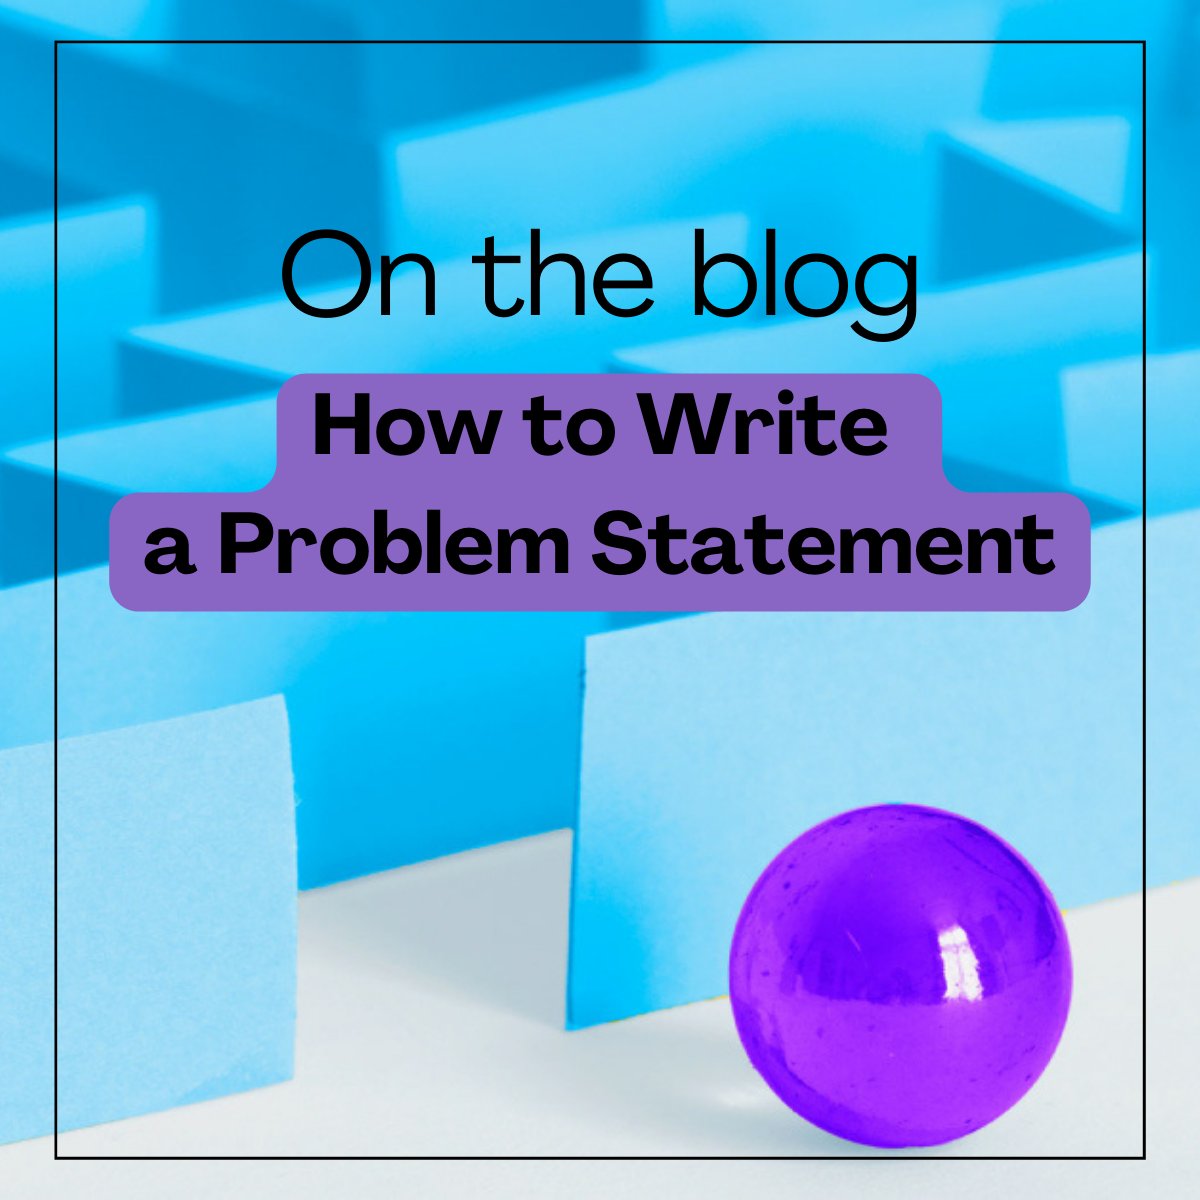 Got a problem? Then you need a problem statement. But crafting an effective one can be challenging. Here are a few tips: bit.ly/3VV90u2 #pmot